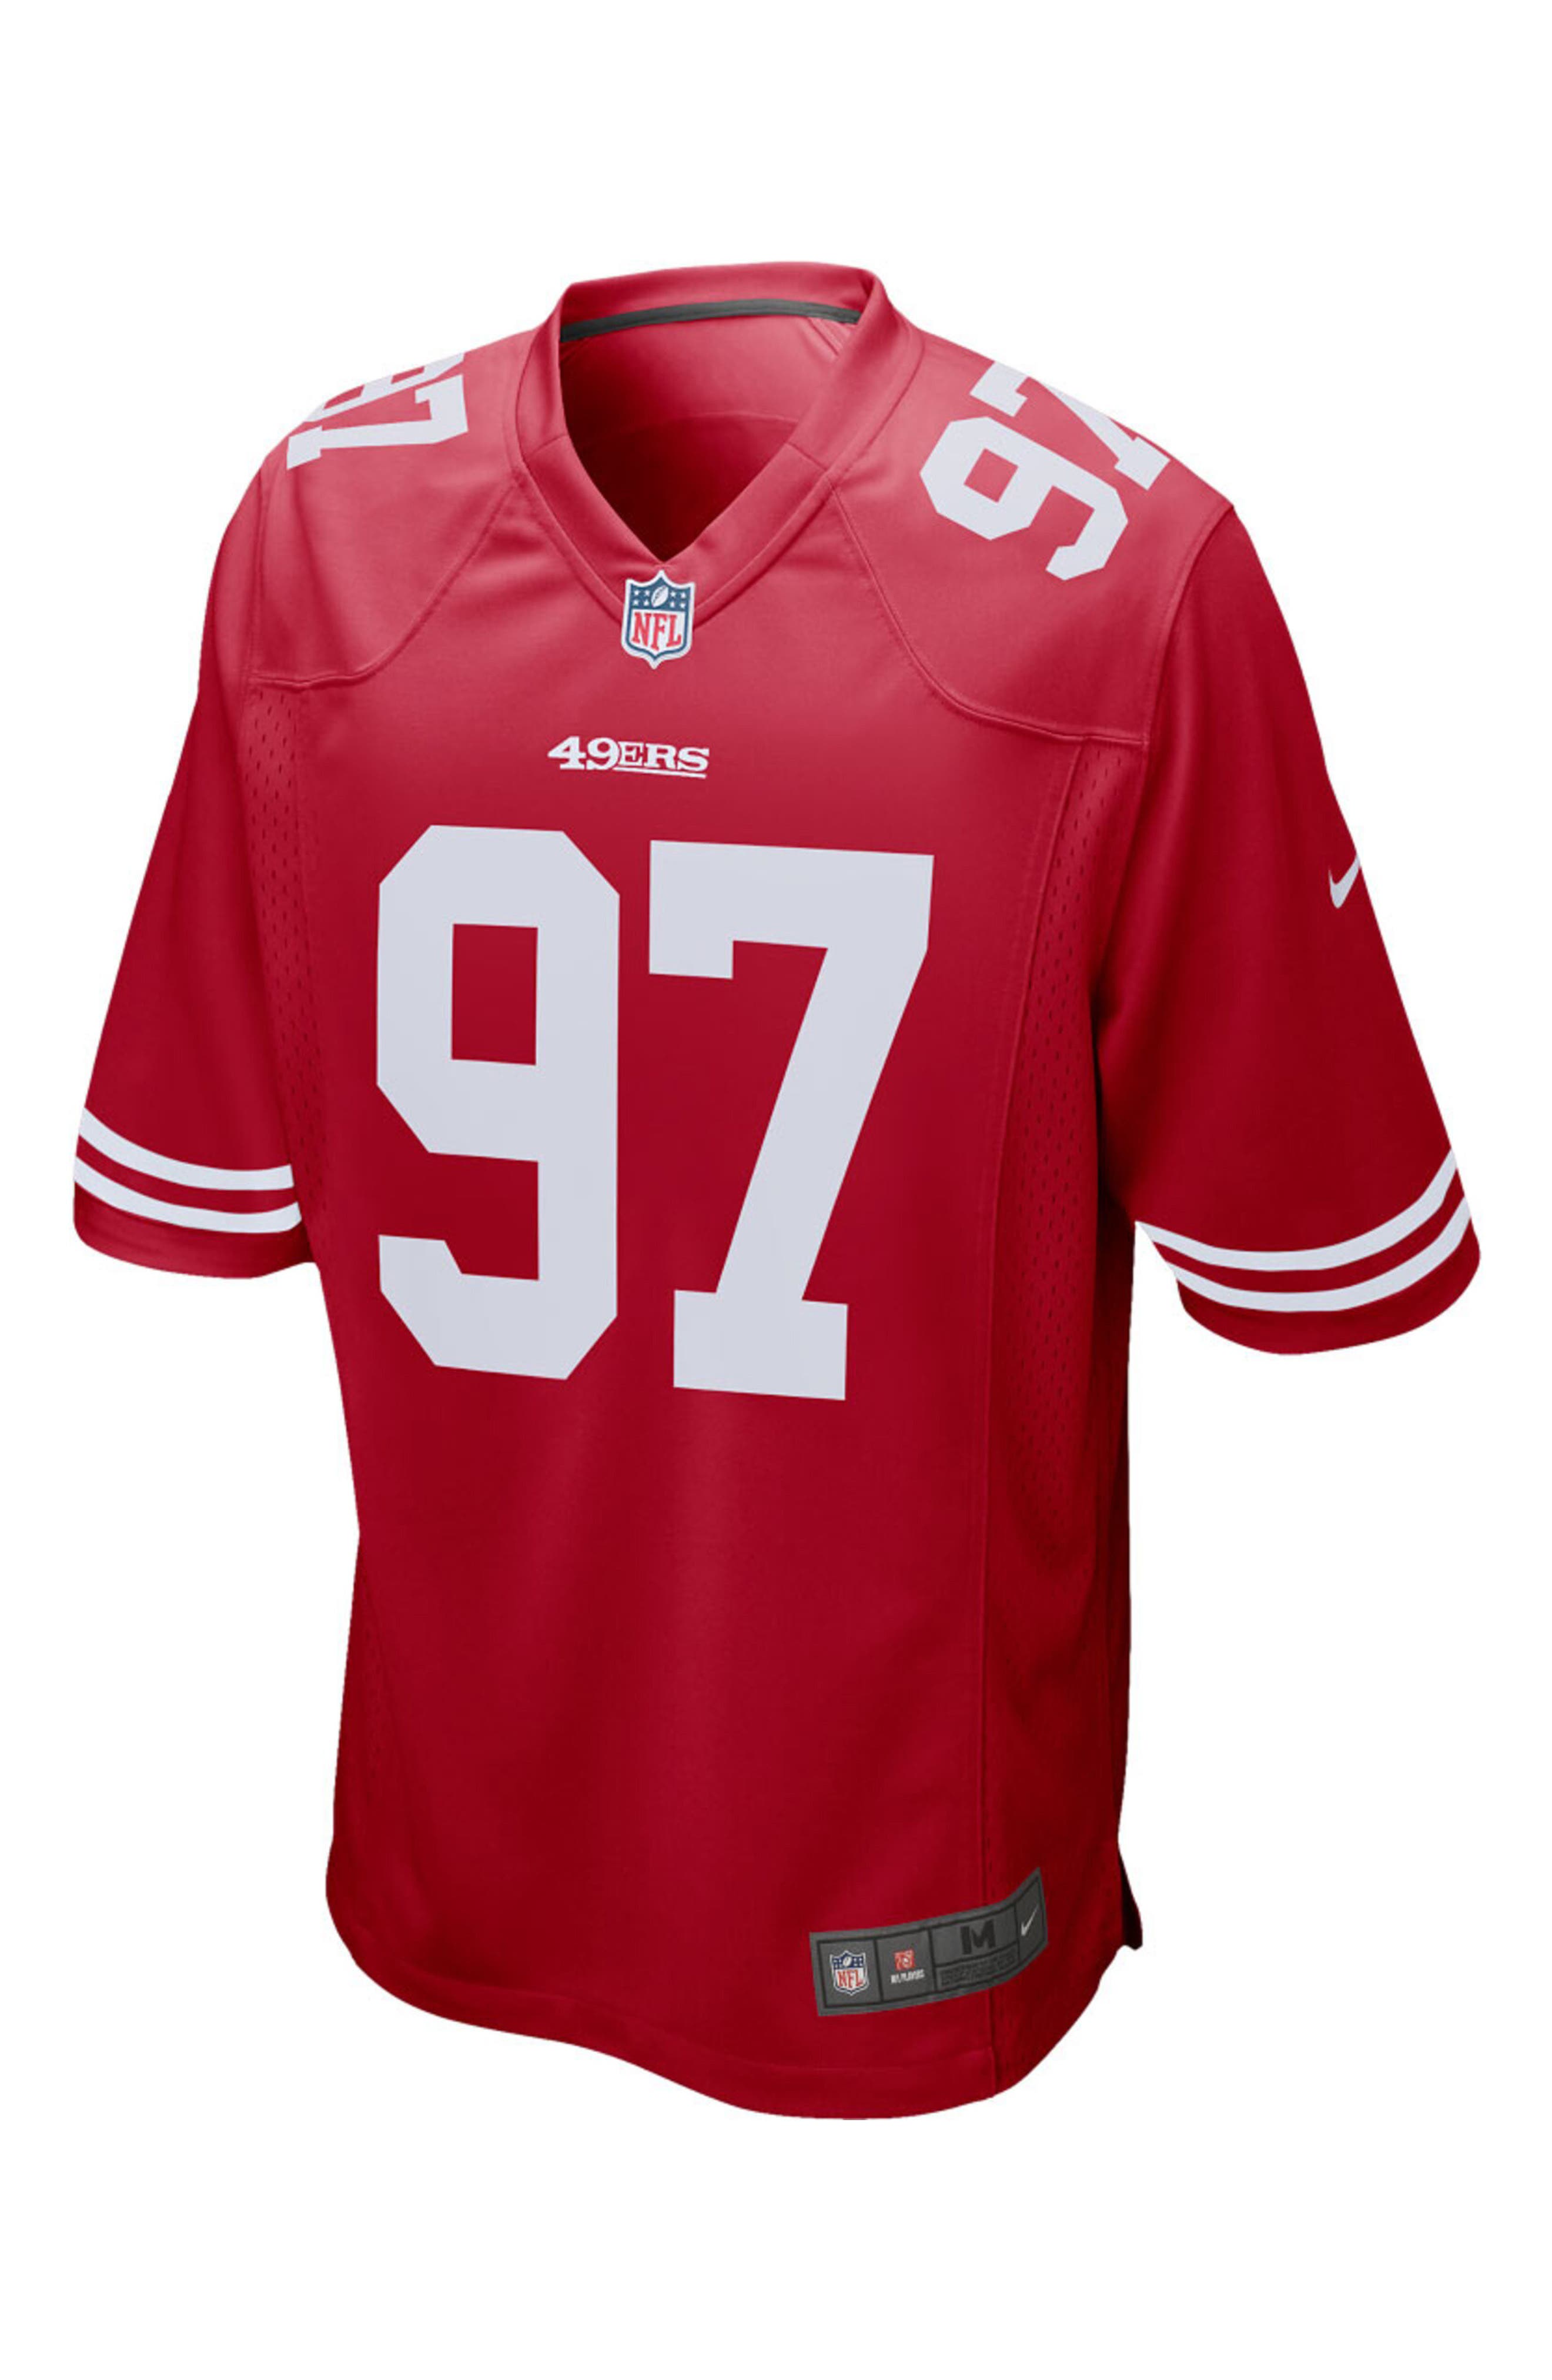 UPC 194093453192 product image for Youth Nike Nick Bosa Scarlet San Francisco 49ers Player Game Jersey at Nordstrom | upcitemdb.com